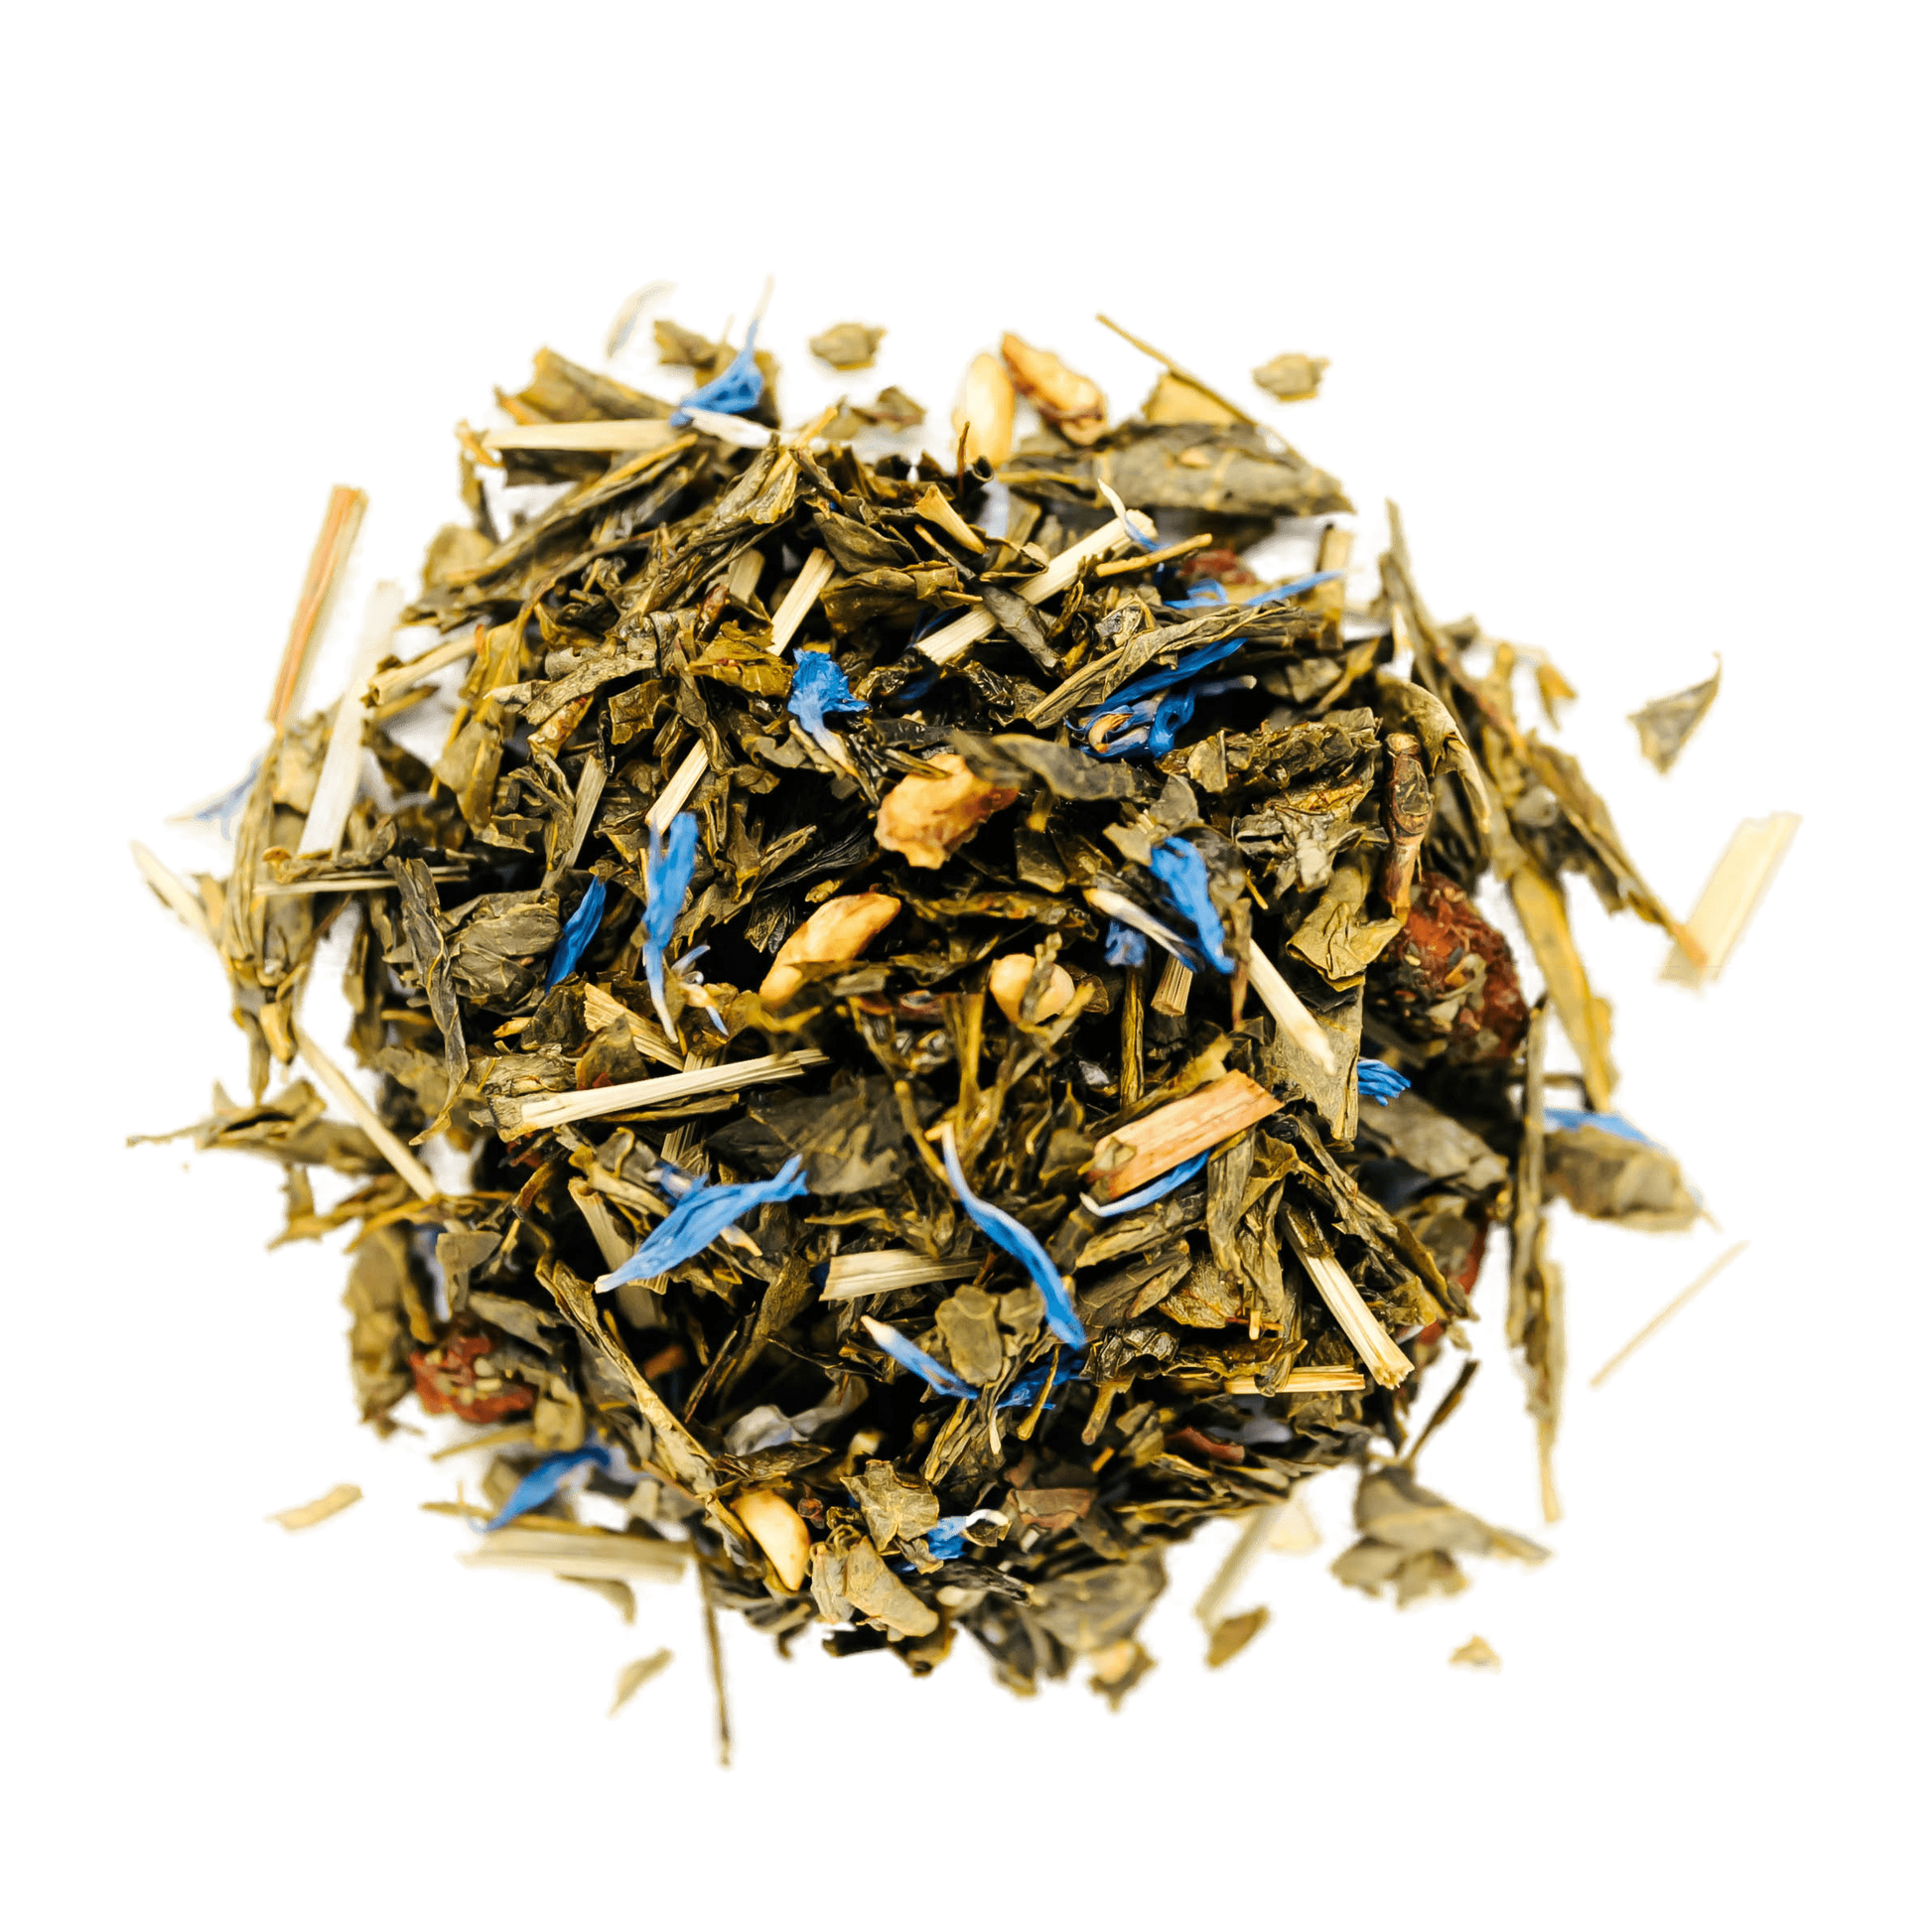 Beguiling Berries Green Tea Loose Leaf Tea leaves sit on a white surface